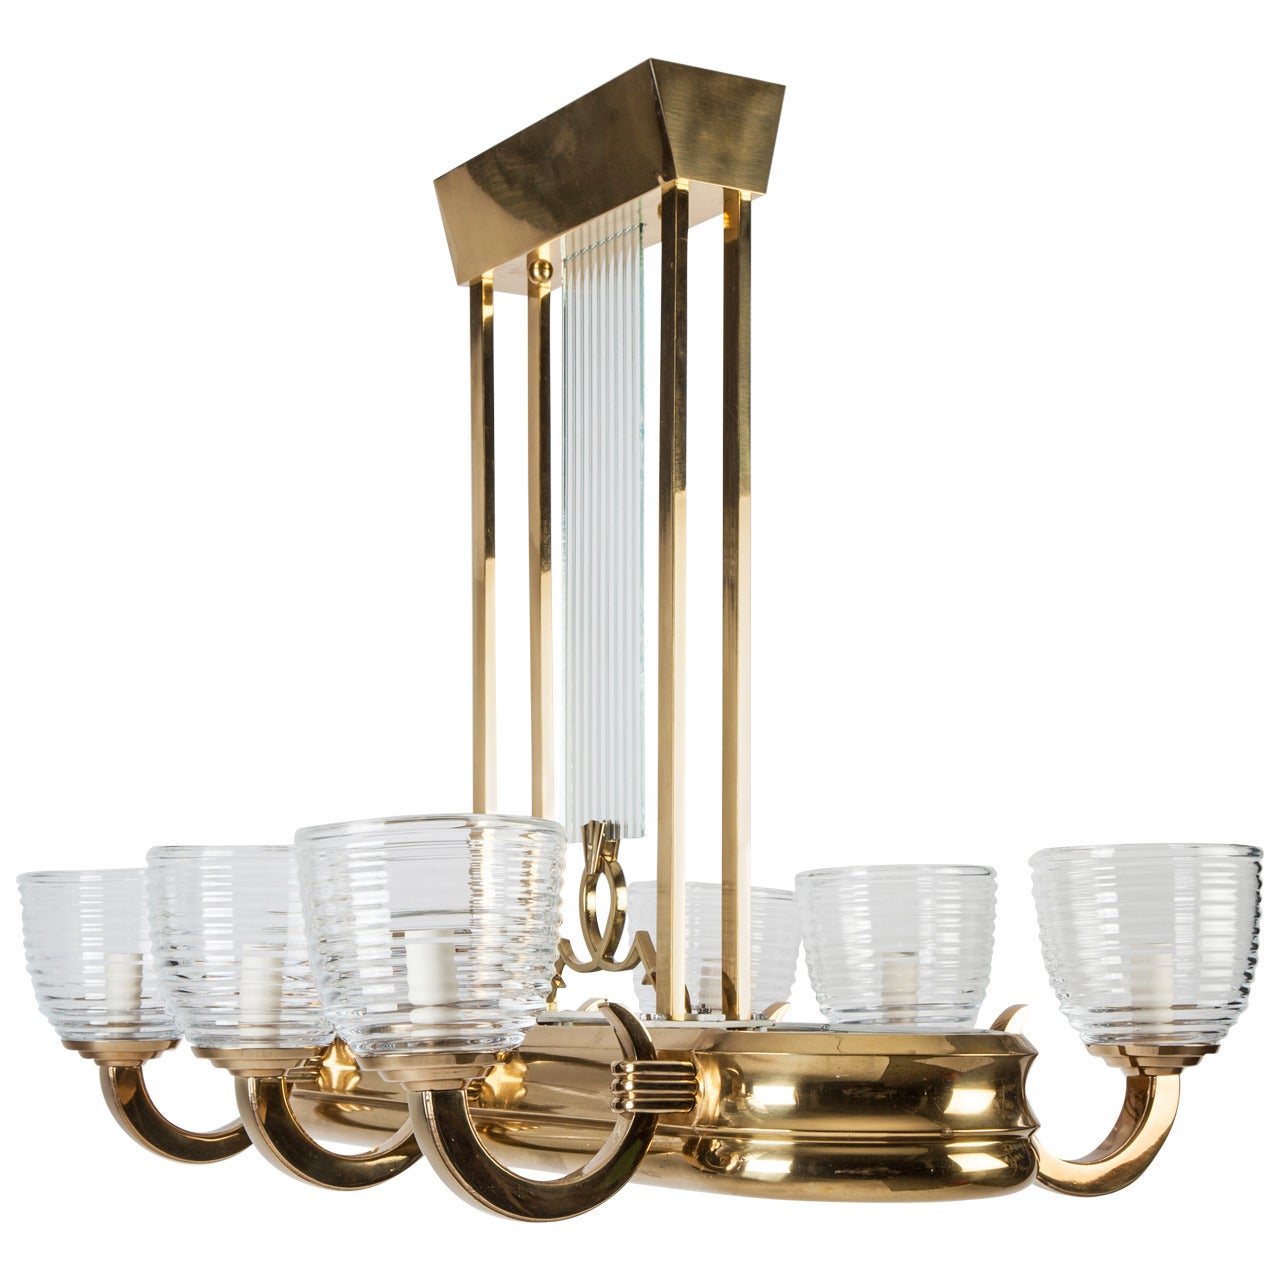 Art Deco Linear Chandelier in Solid Brass with Six Arms & Handblown Glass Shades